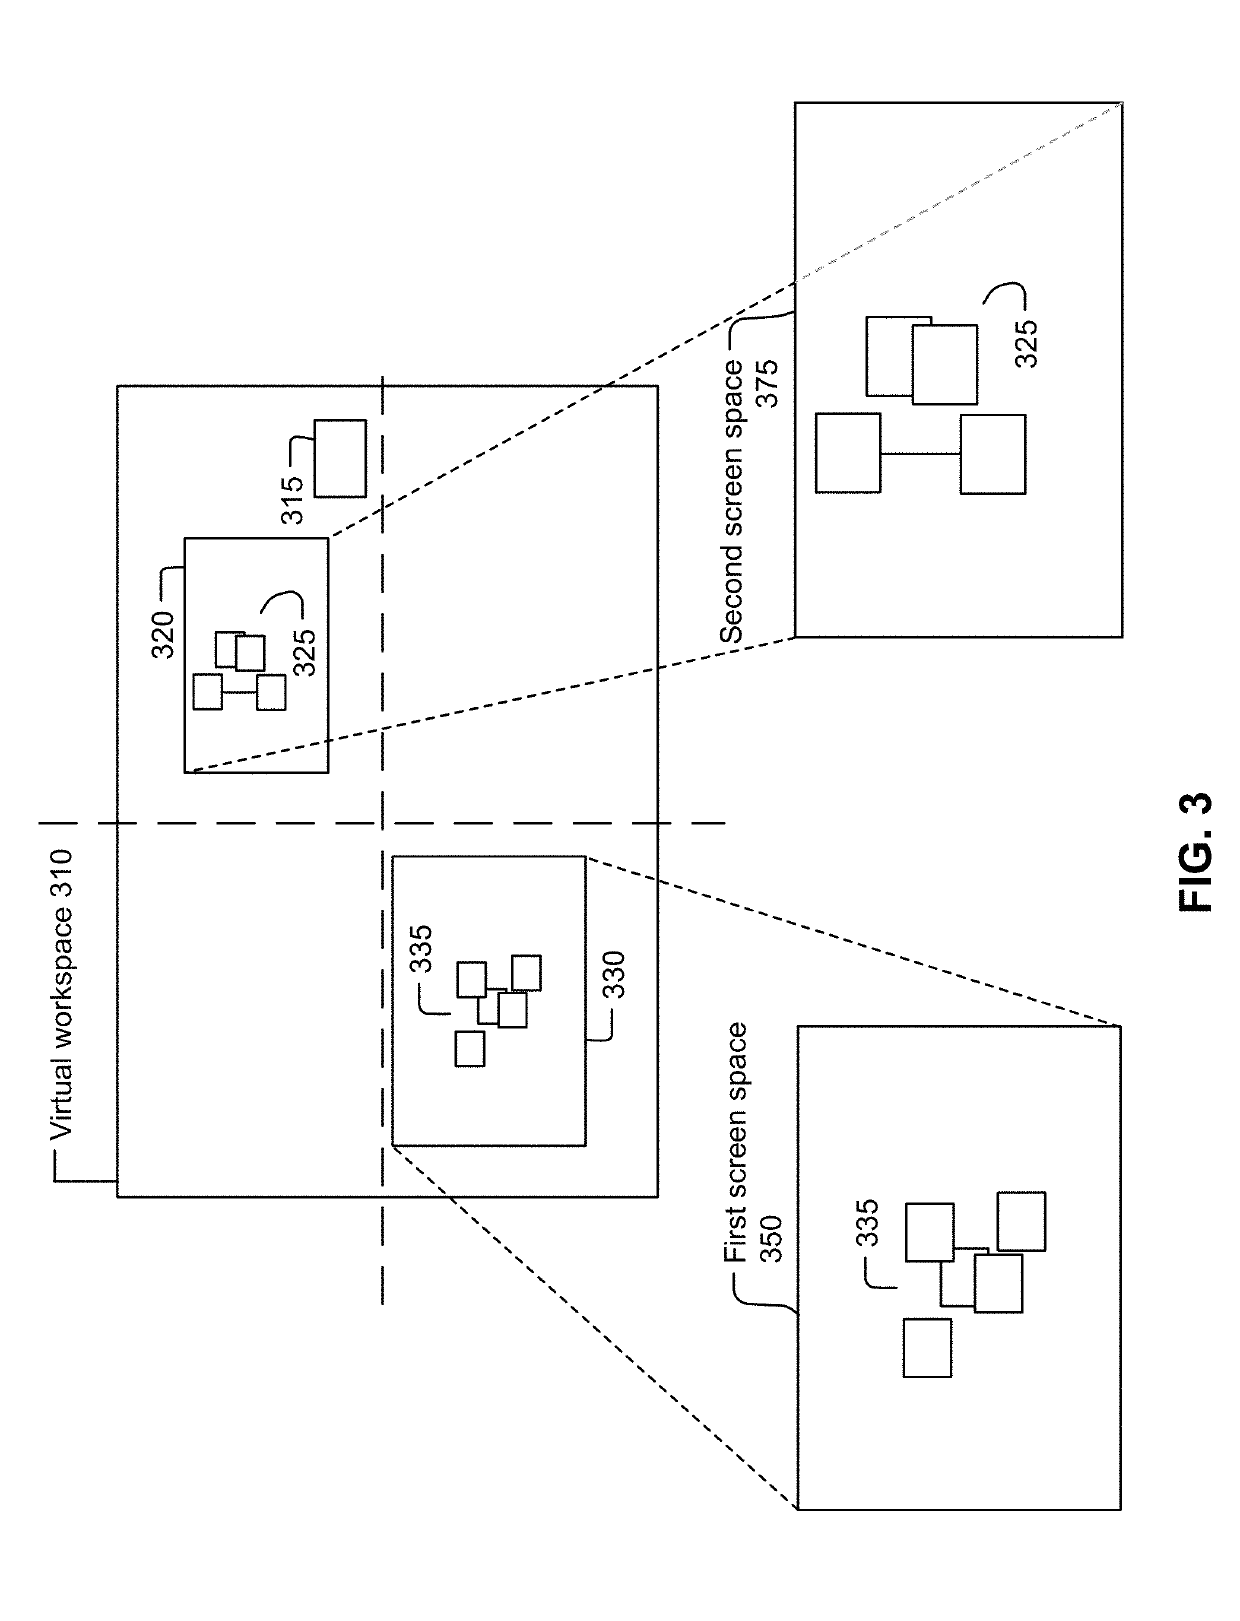 Virtual workspace including shared viewport markers in a collaboration system